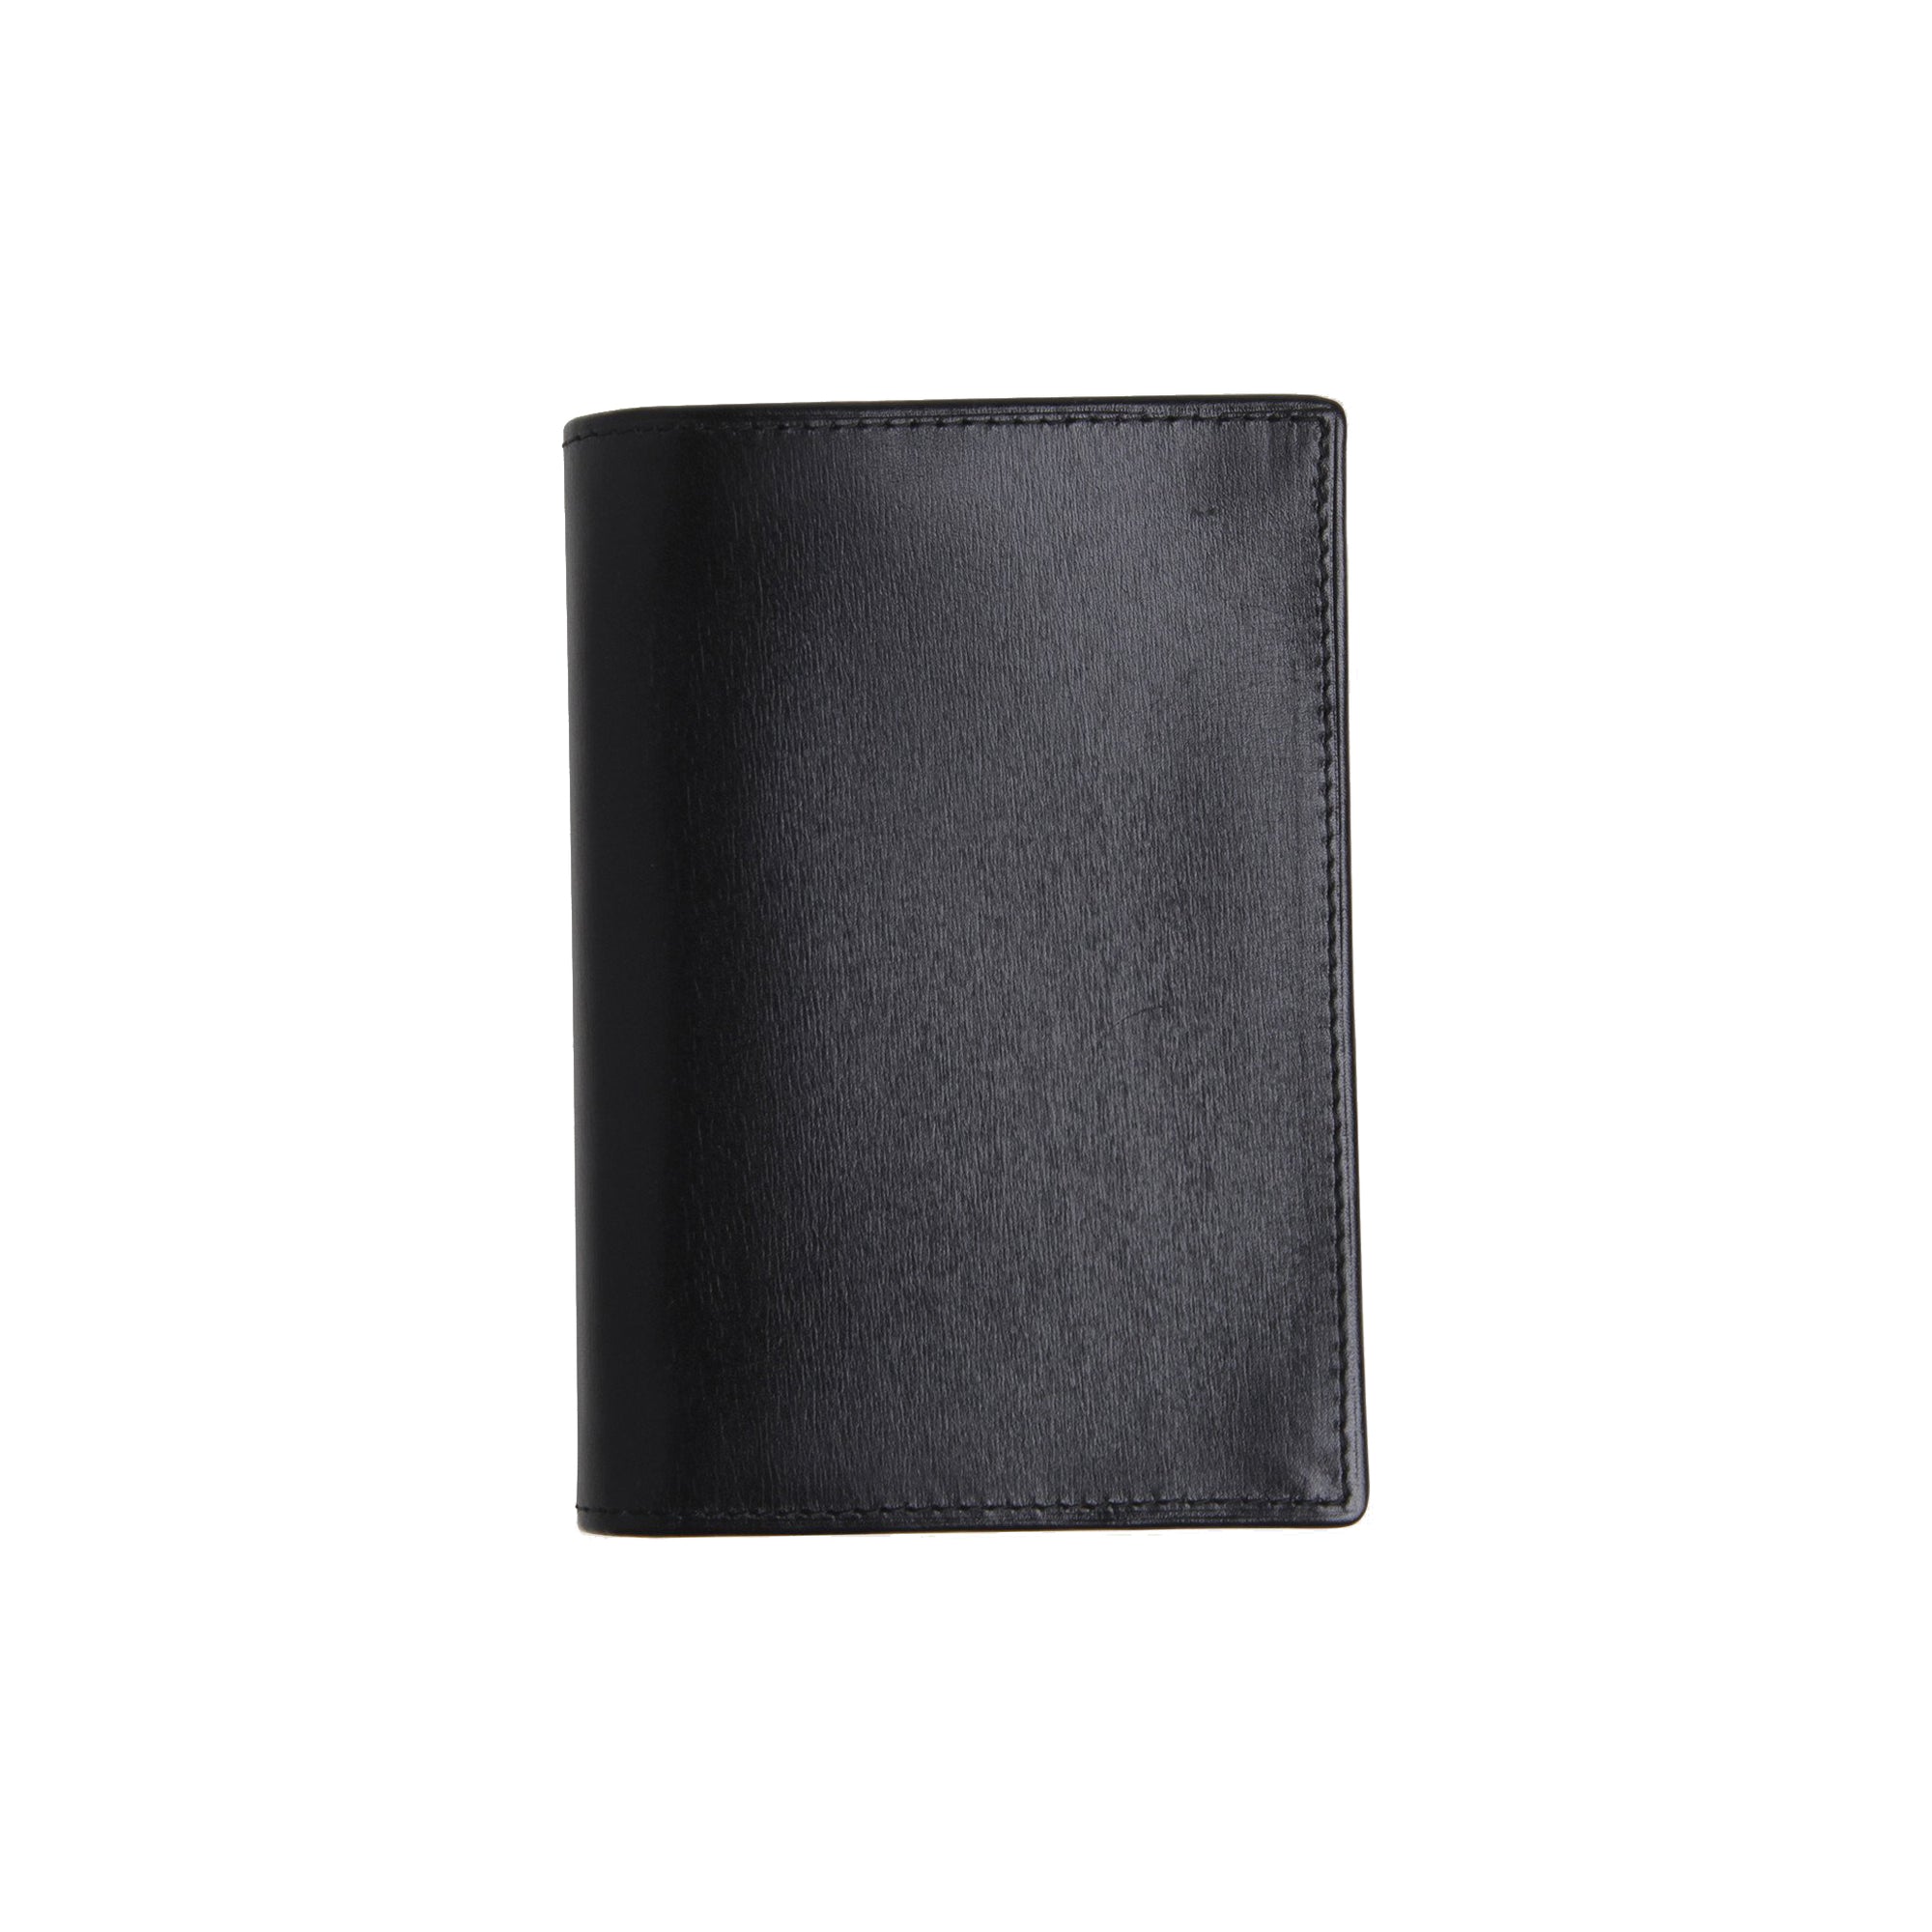 ID Gusset Credit Card Case